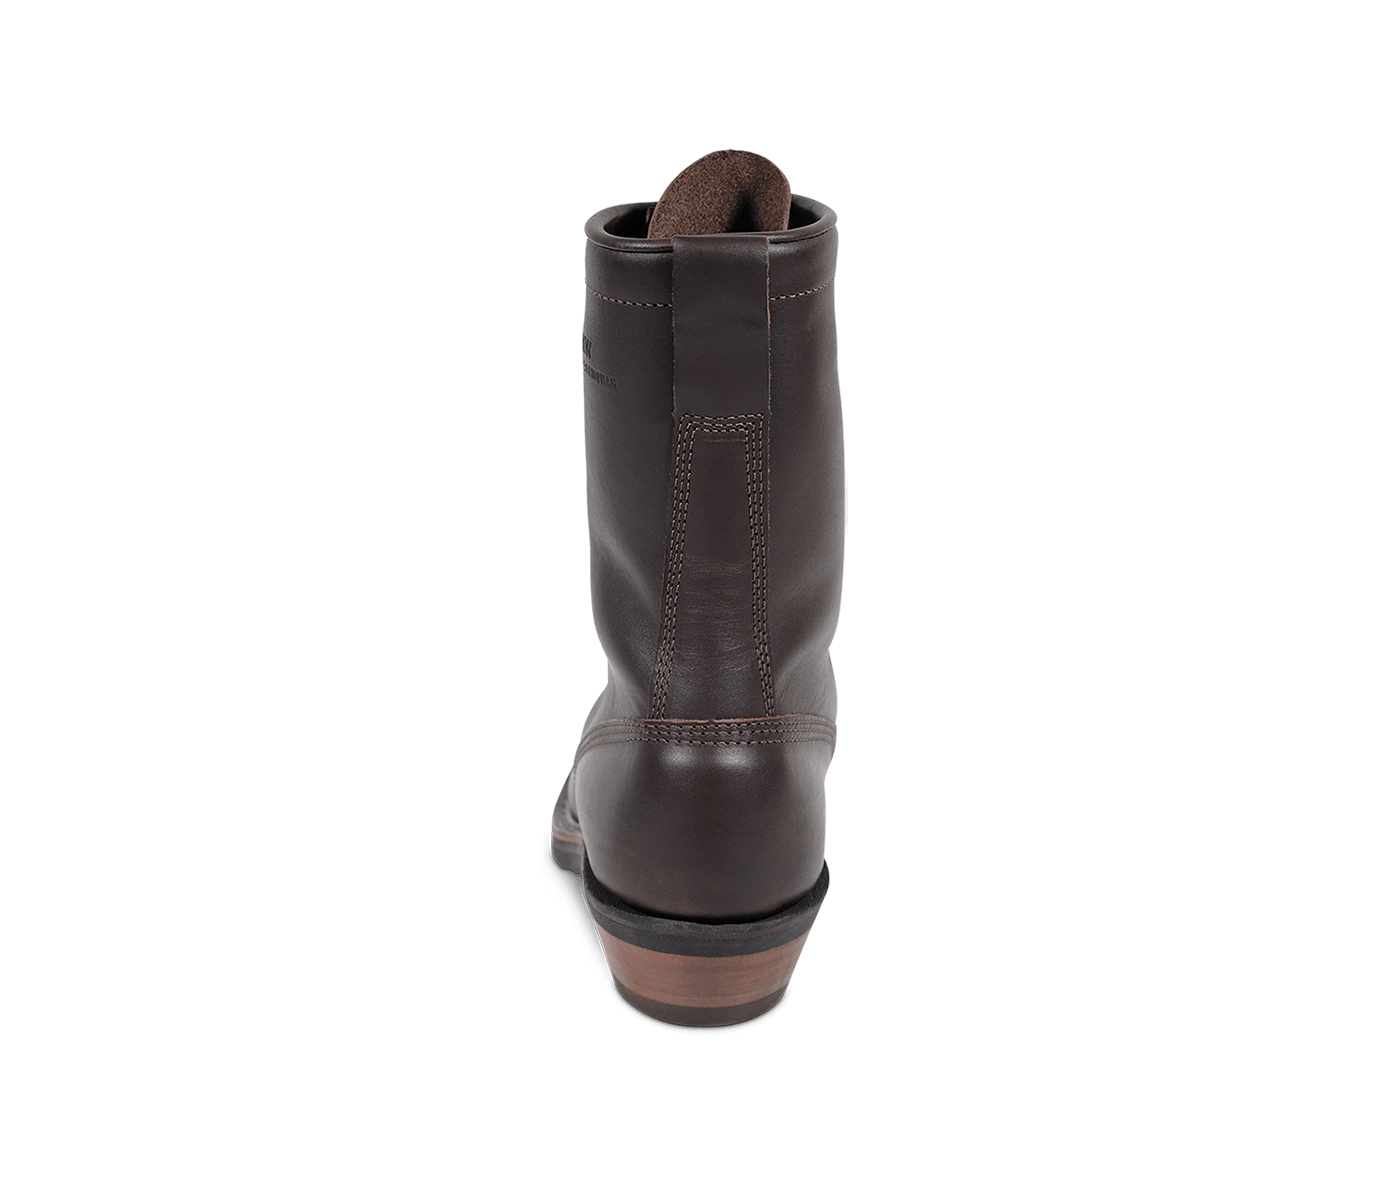 Mule Packer Pointed Toe: White's Boots, Inc.